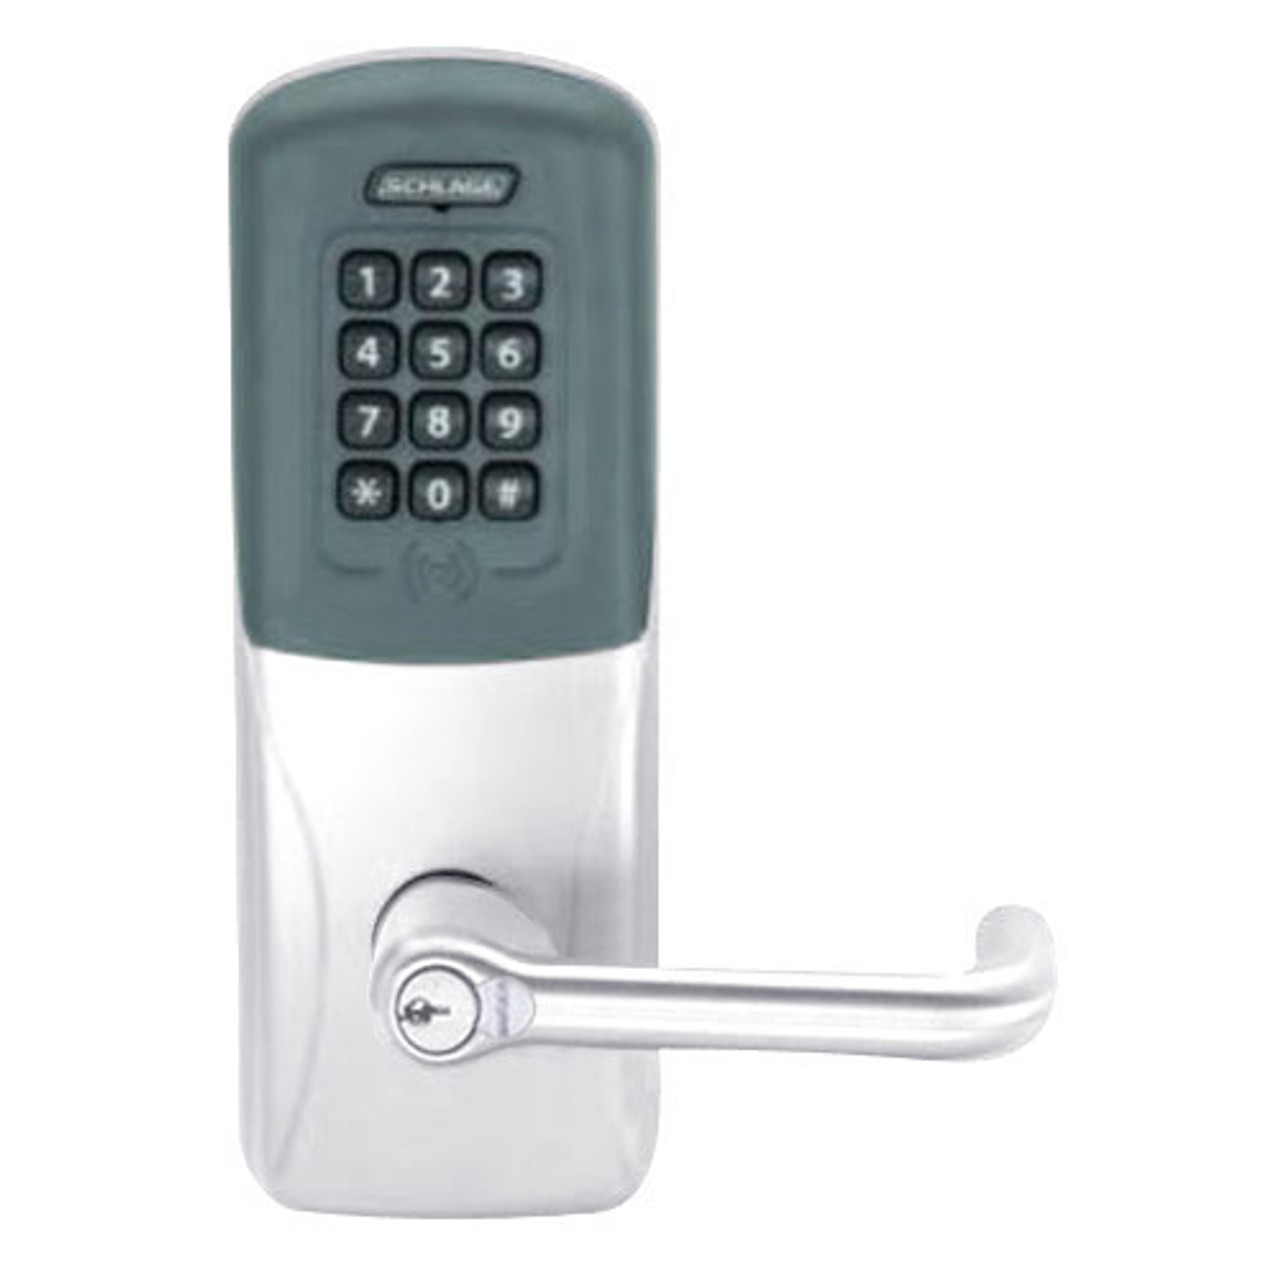 CO200-MD-40-PRK-TLR-GD-29R-625 Mortise Deadbolt Standalone Electronic Proximity with Keypad Locks in Bright Chrome